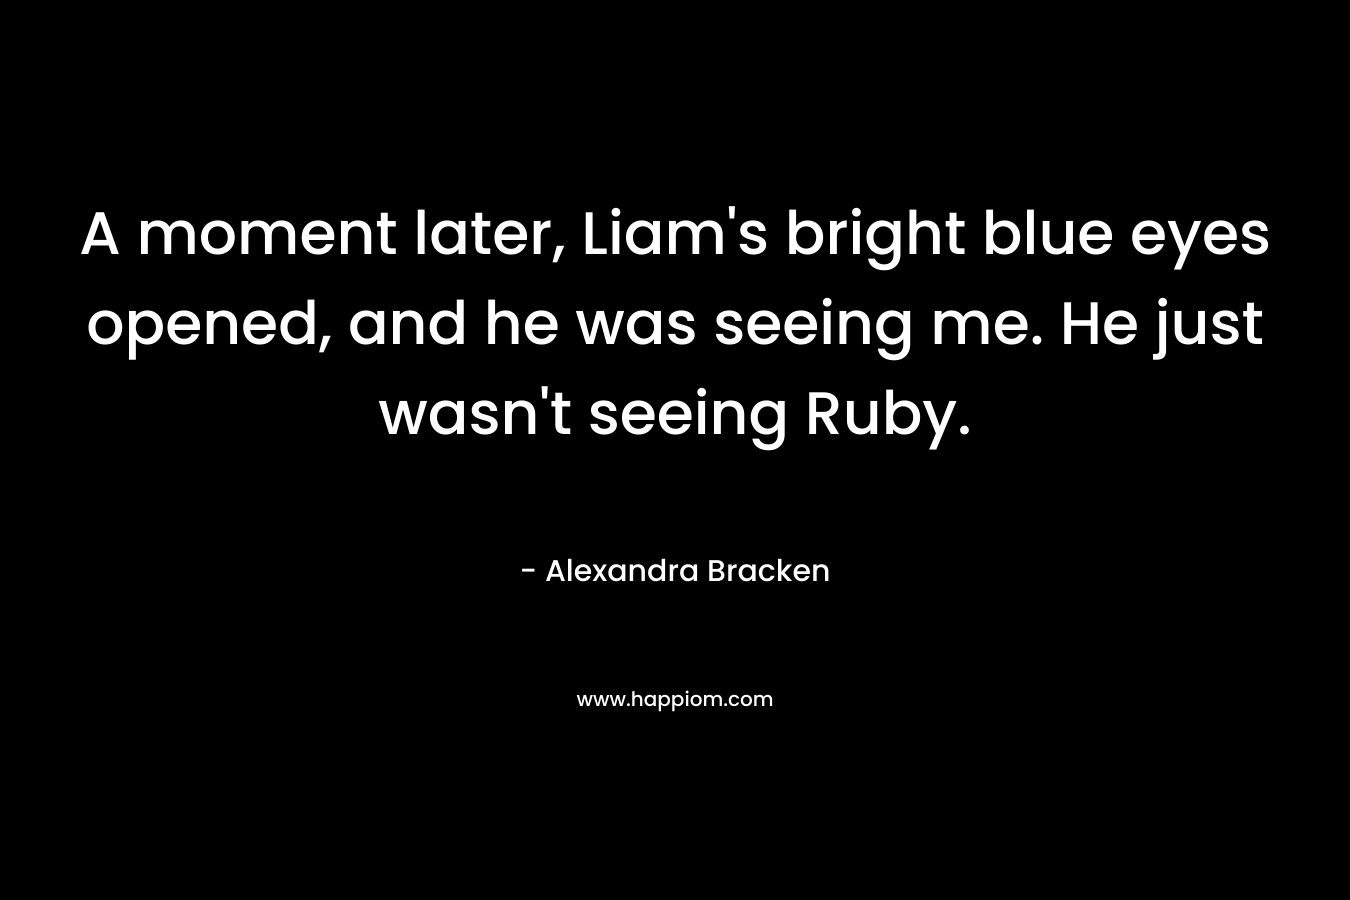 A moment later, Liam’s bright blue eyes opened, and he was seeing me. He just wasn’t seeing Ruby. – Alexandra Bracken